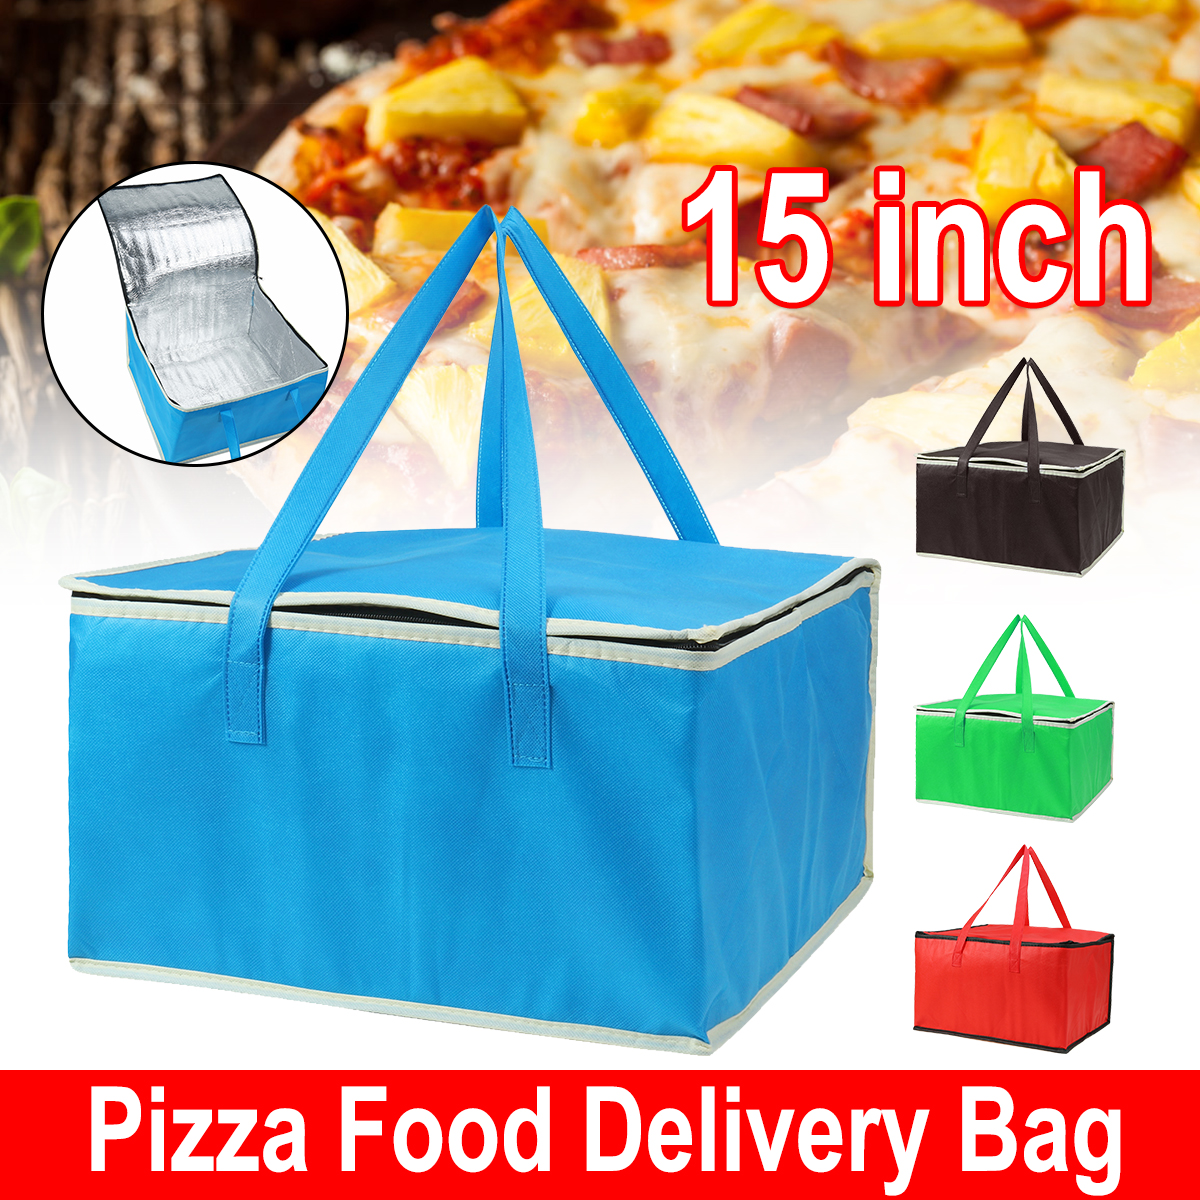 12inch-Picnic-Bag-Food-Insulated-Bag-Camping-BBQ-Lunch-Bag-Portable-Pizza-Food-Pizza-Delivery-Bag-1637132-1